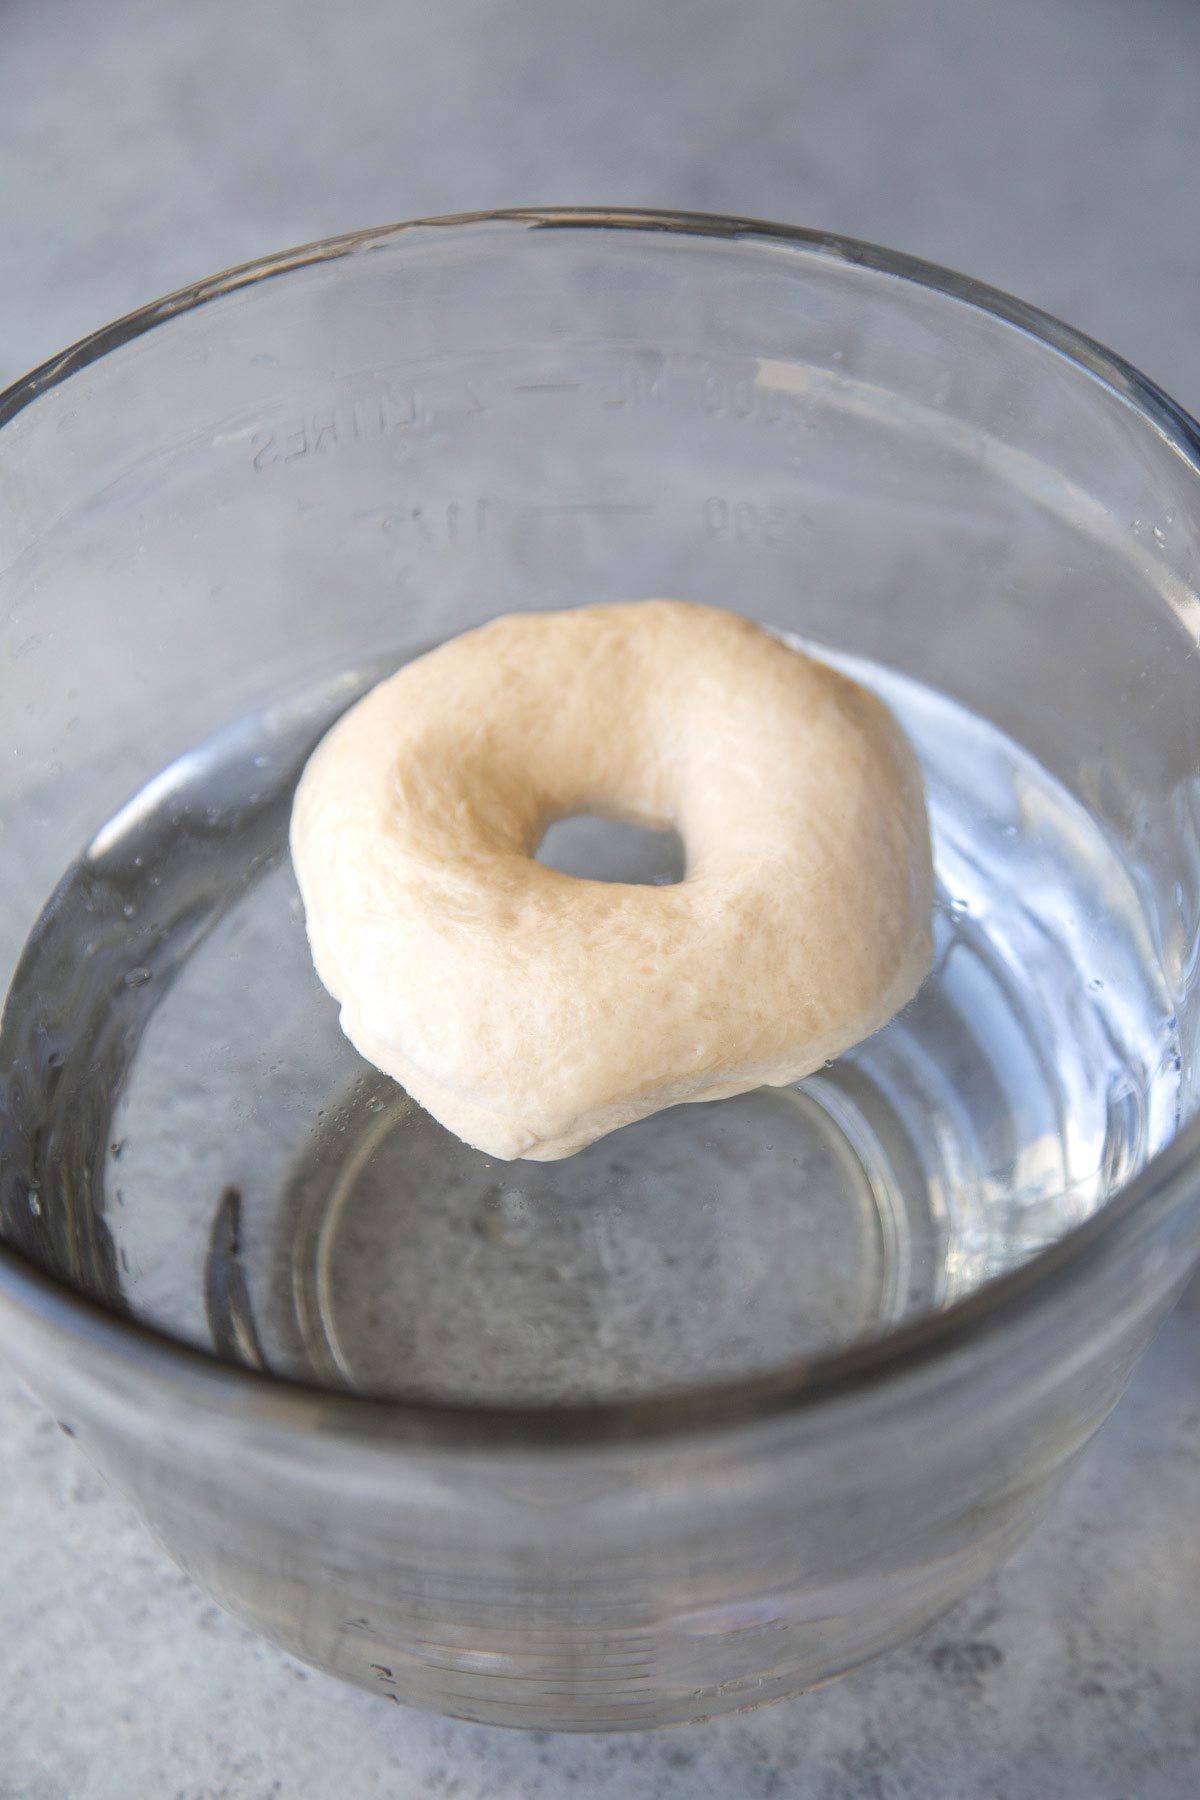 place bagel in bowl of cool water to see if it floats.